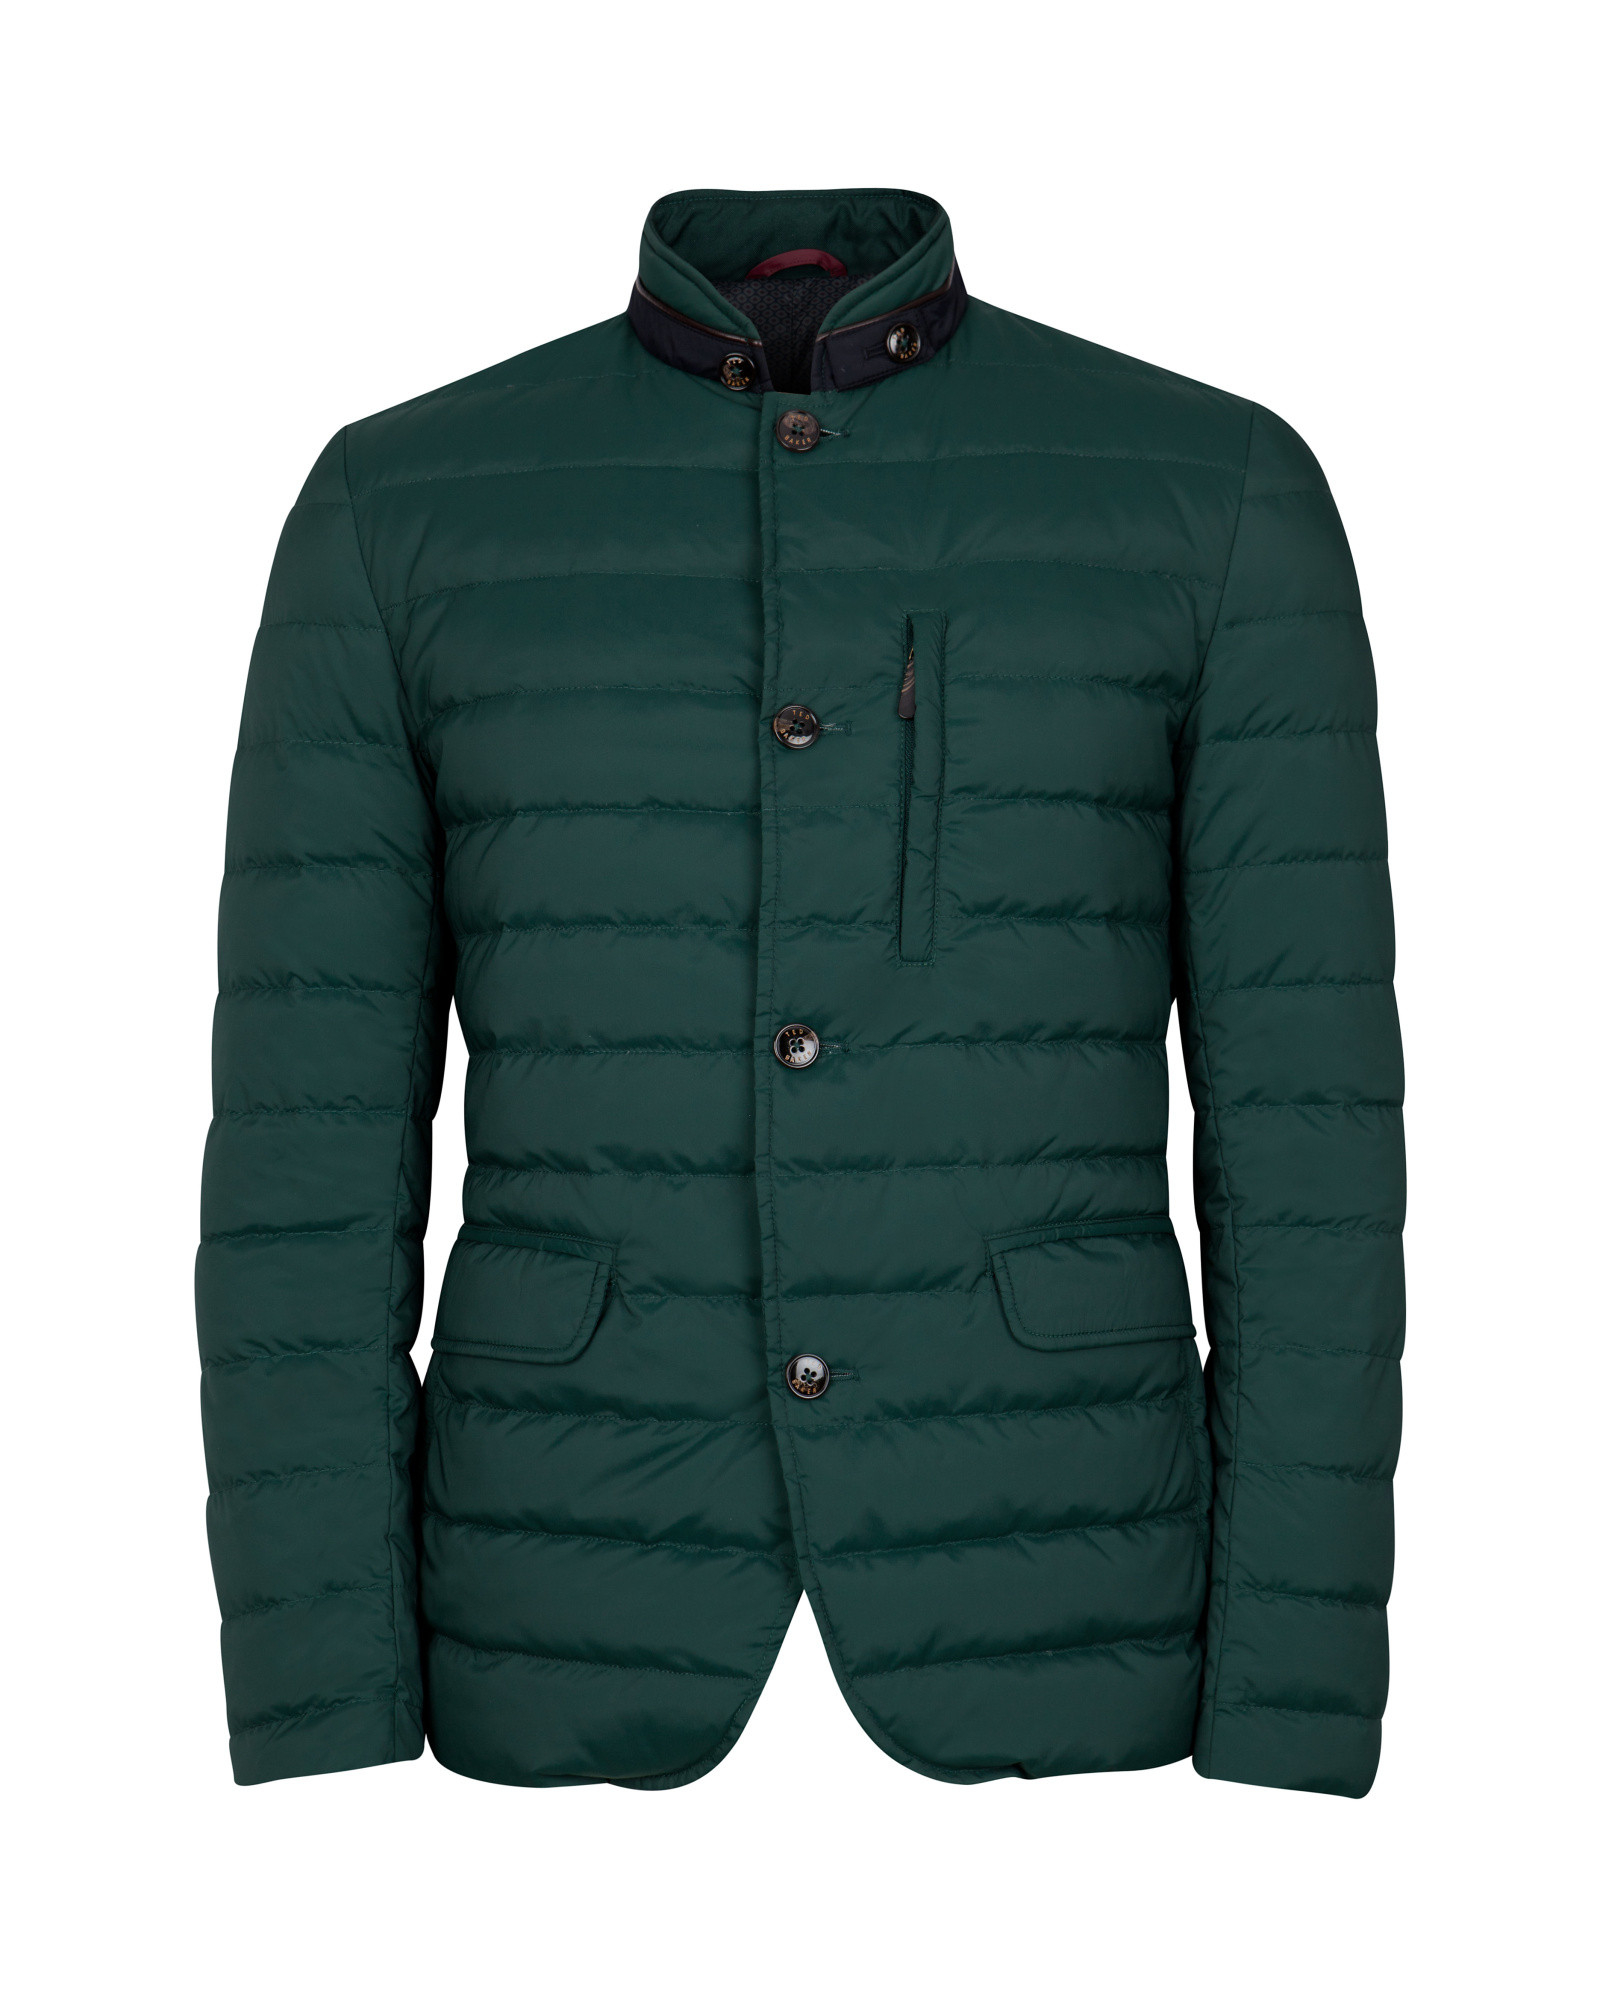 Lyst - Ted Baker Quilted Jacket in Green for Men